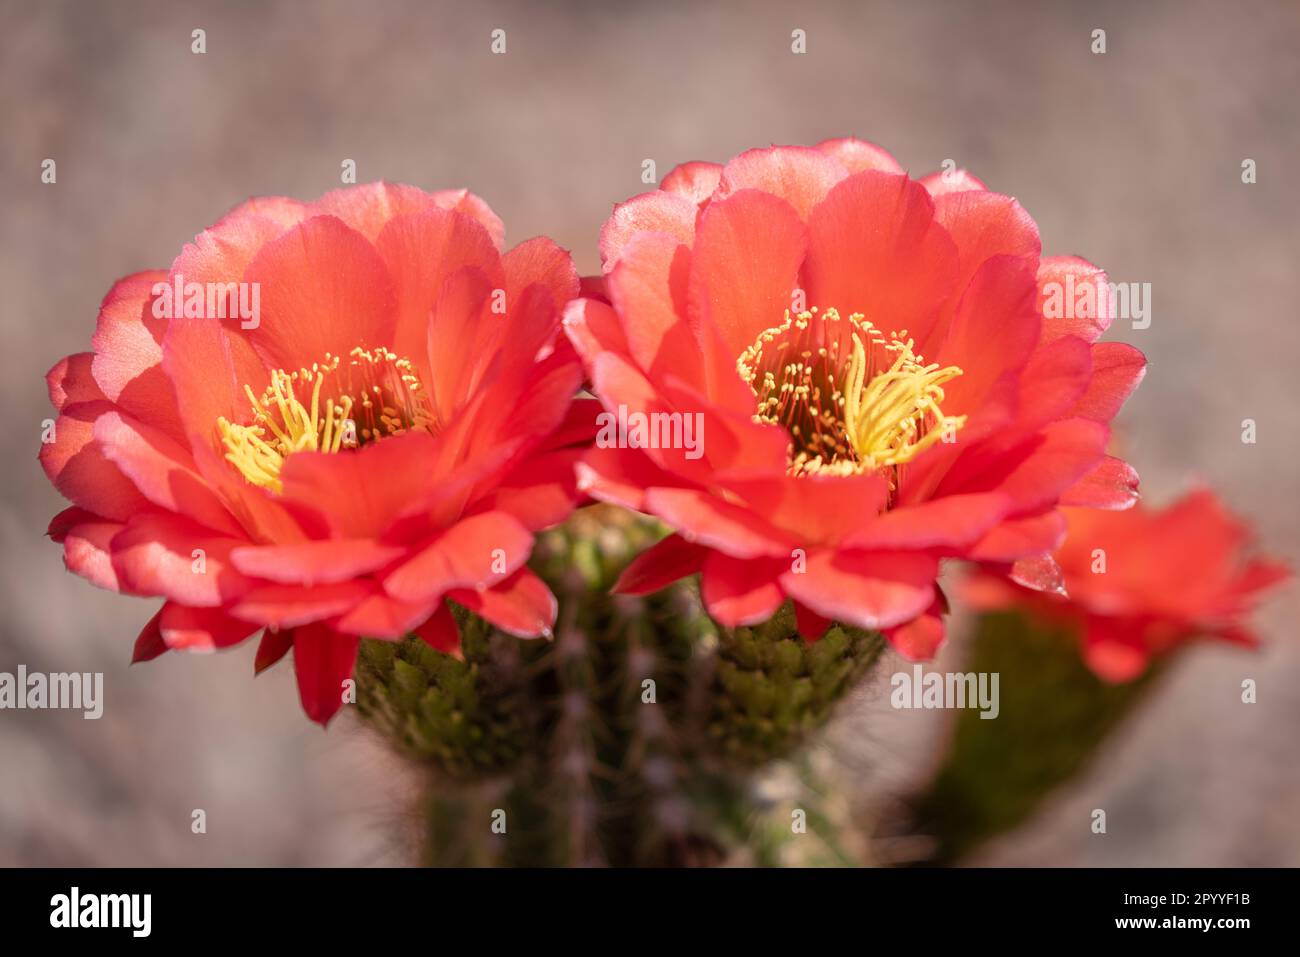 Close-up image of blooming pink acanthocalycium ferrarii flowers in the desert. Stock Photo